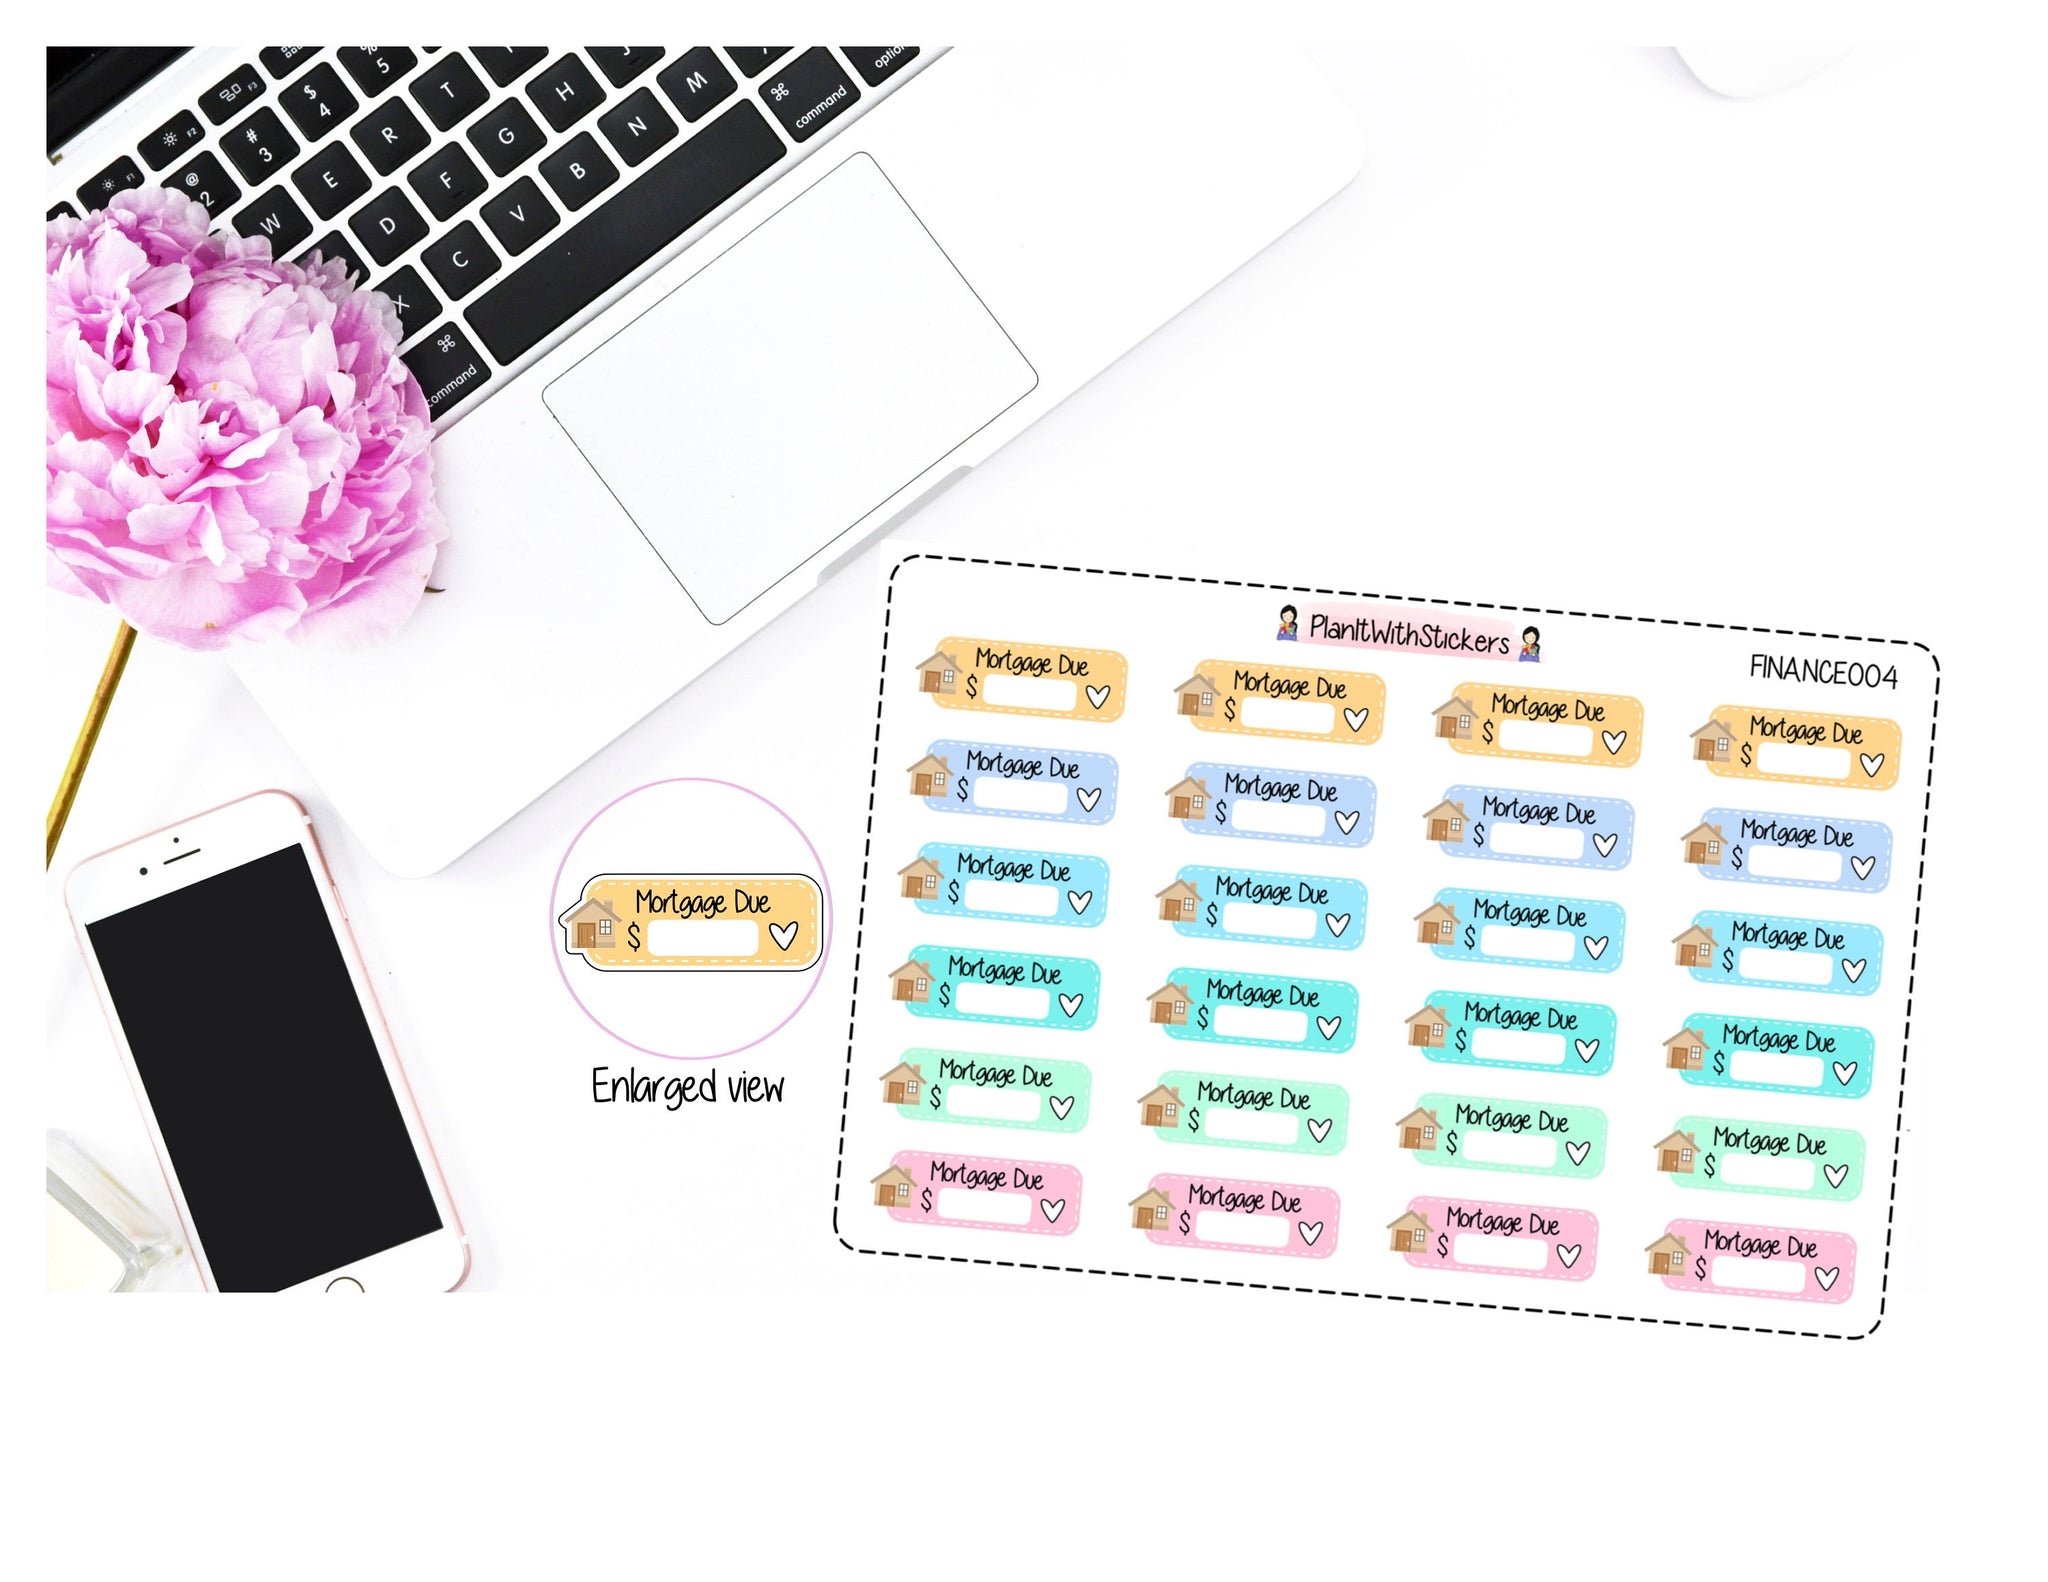 Mortgage Due Pay Bill Planner Stickers in Pastel Colours for , Plum Paper, Recollections, and similar planners